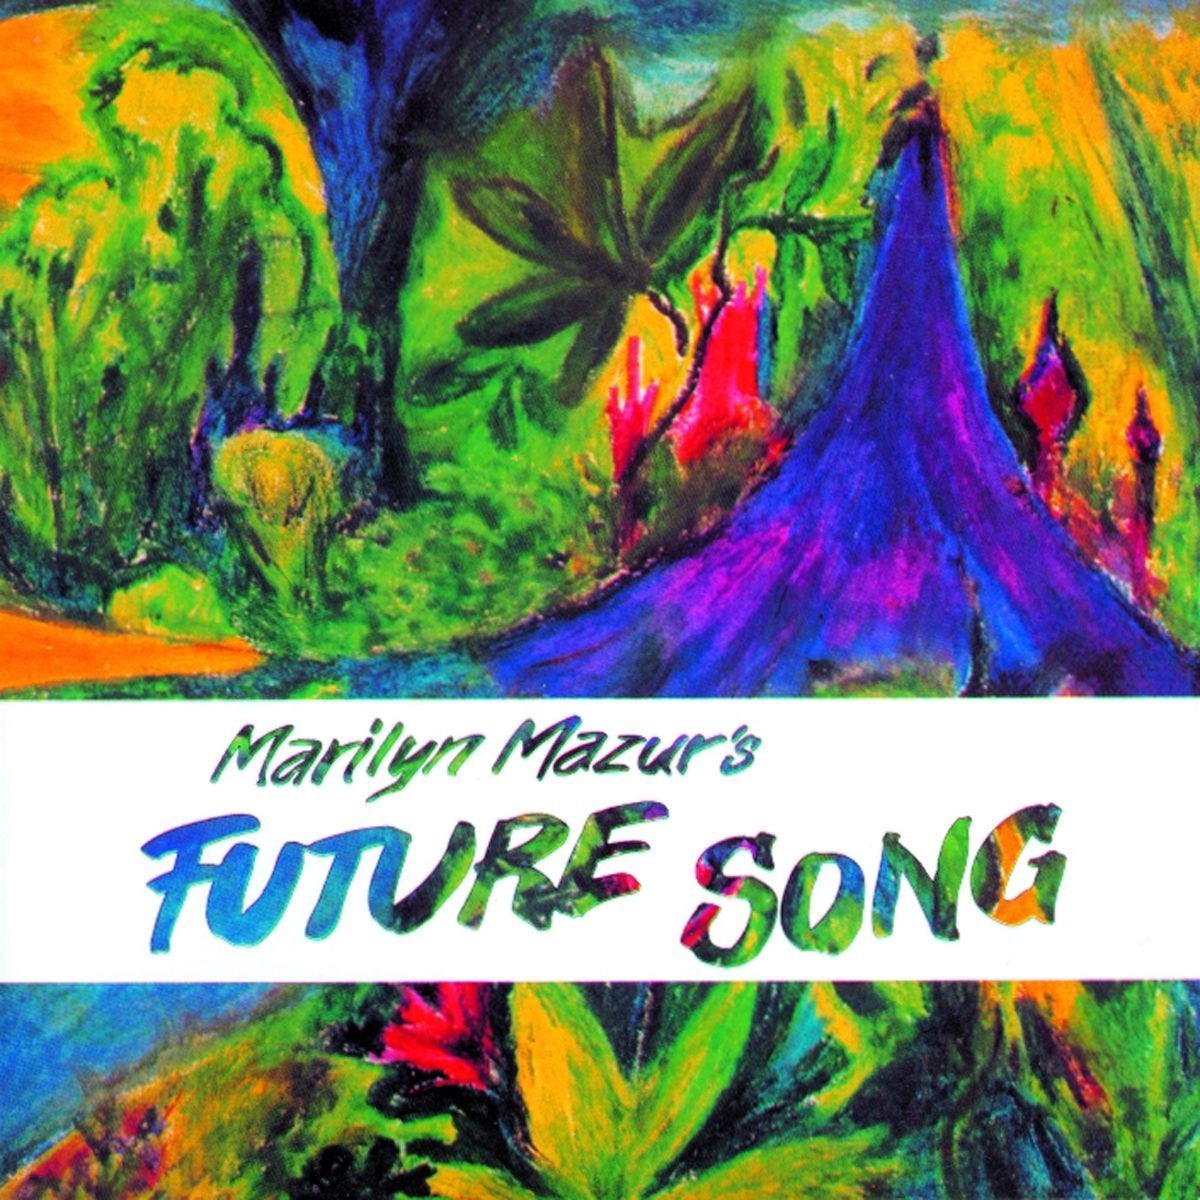 Future song. Marilyn Mazur. Marilyn Mazur young.